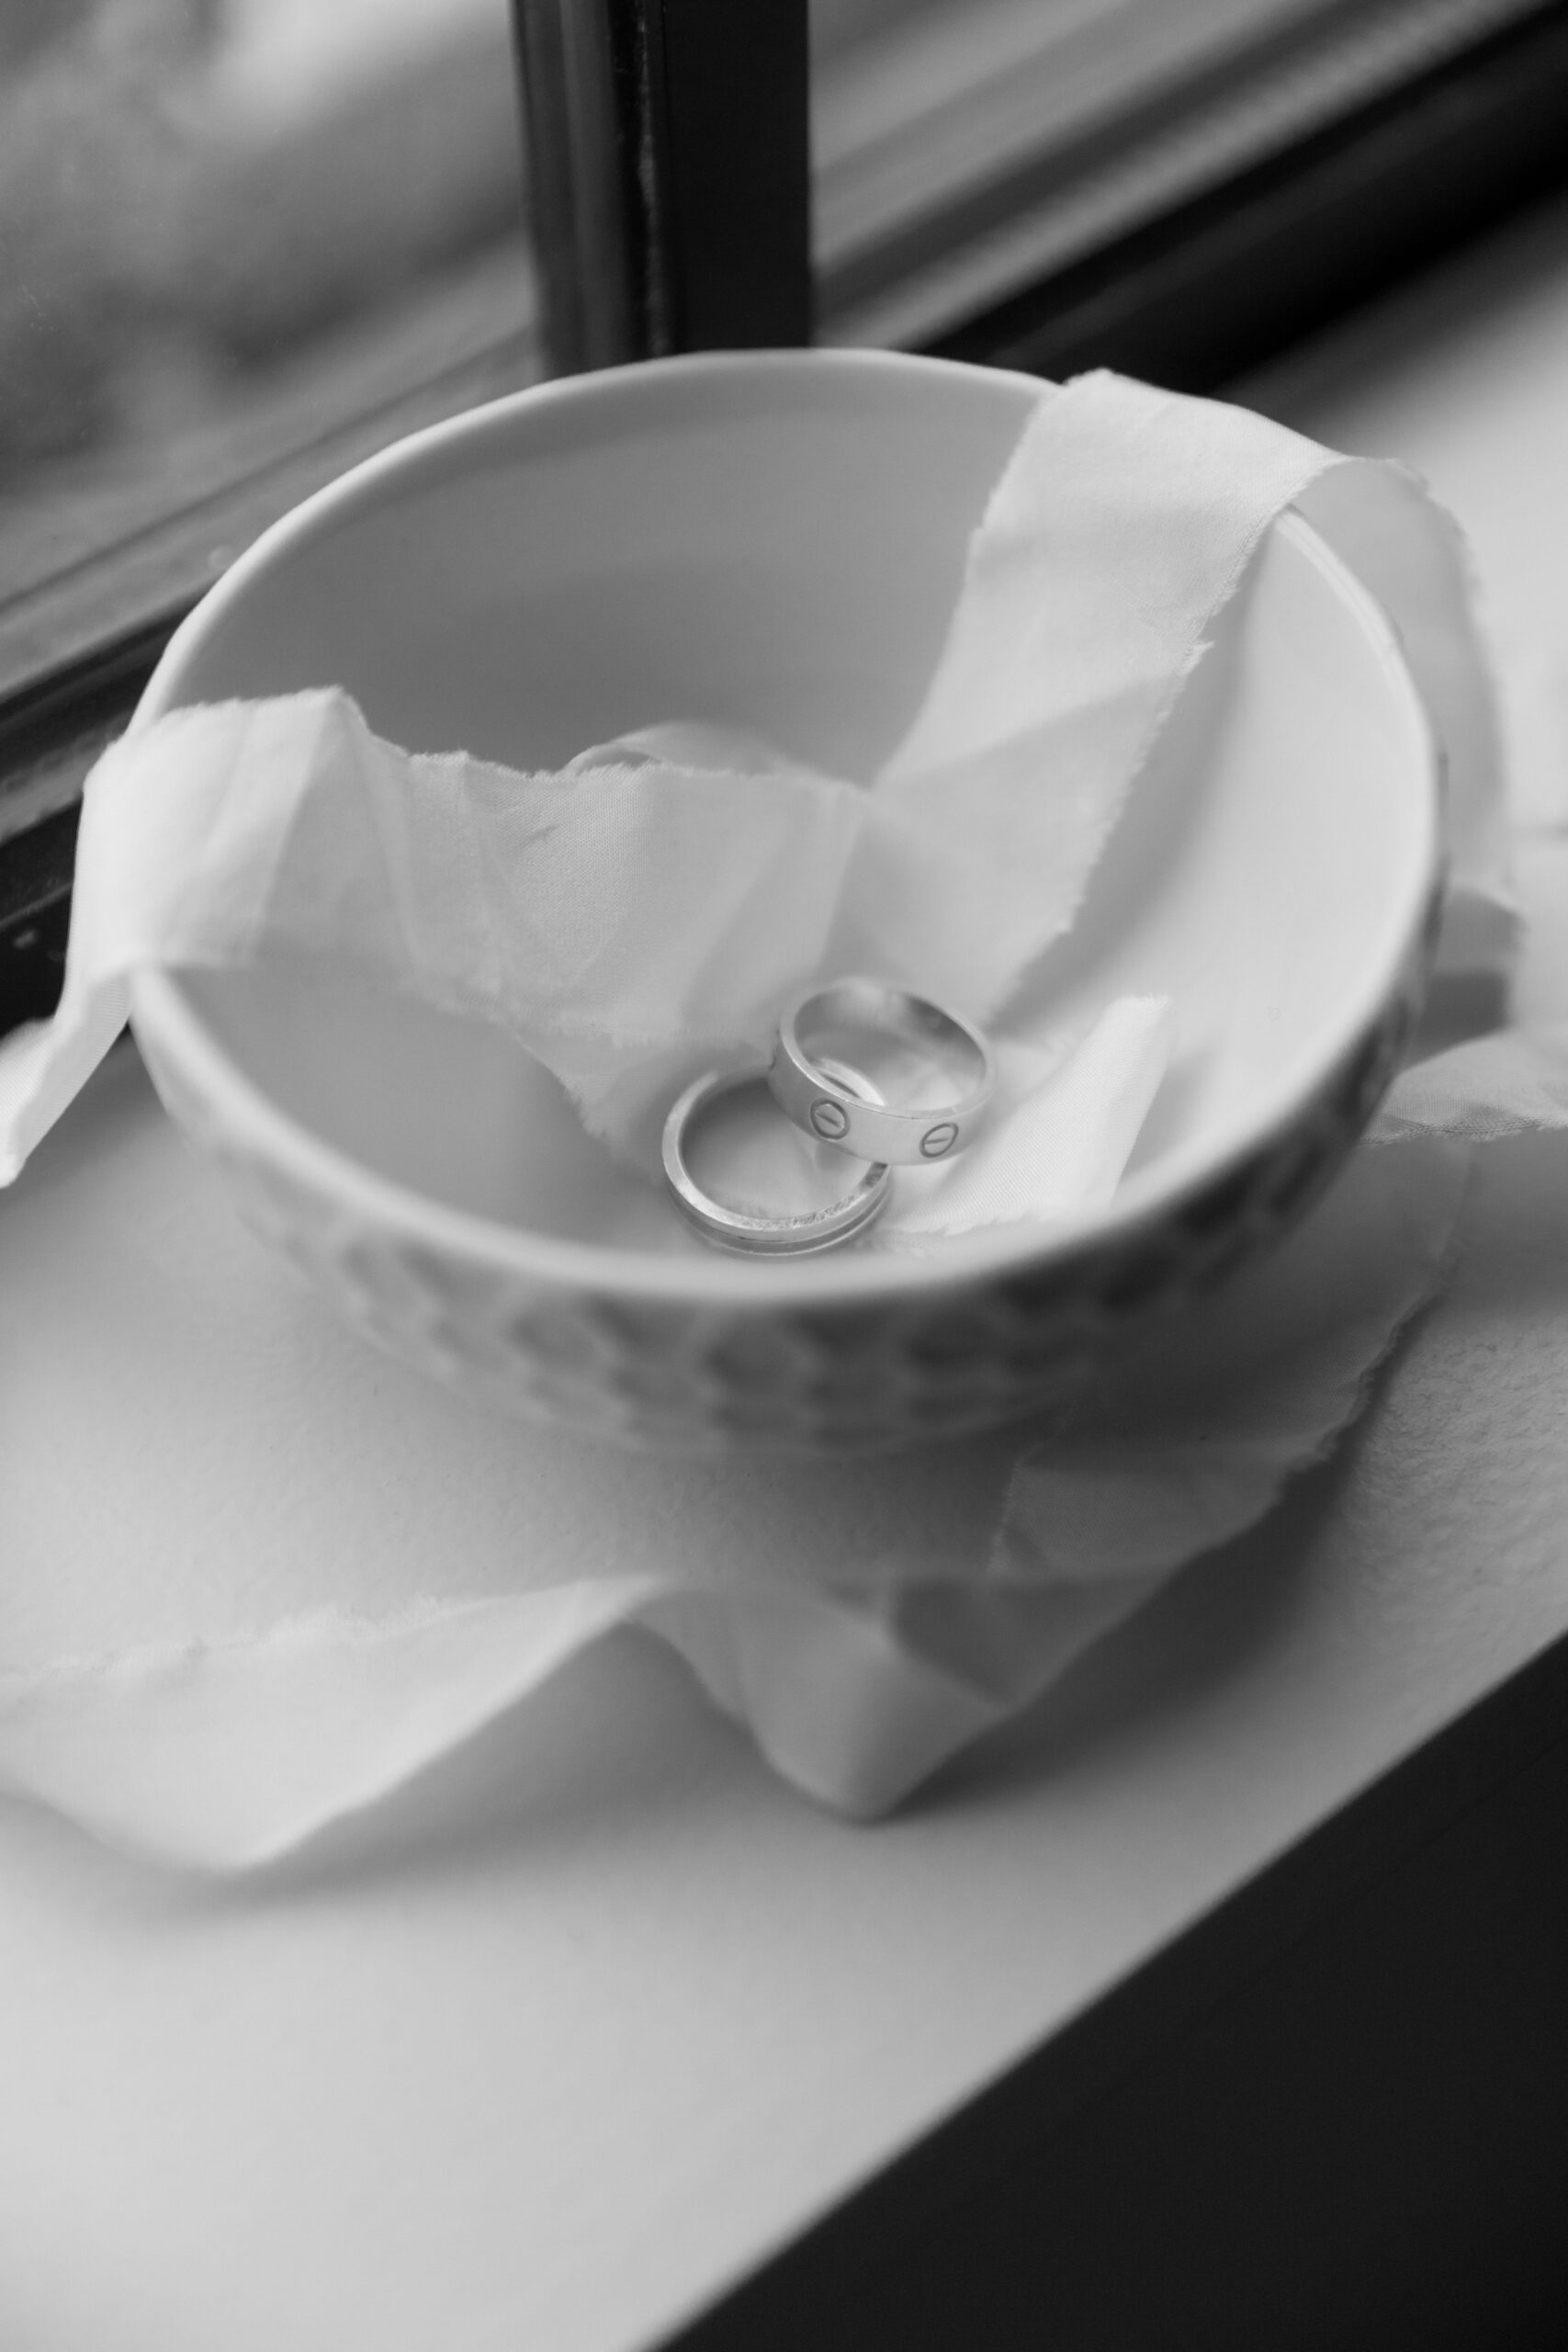 black and white photo of Cartier wedding bands in small dish with ribbon on window ledge